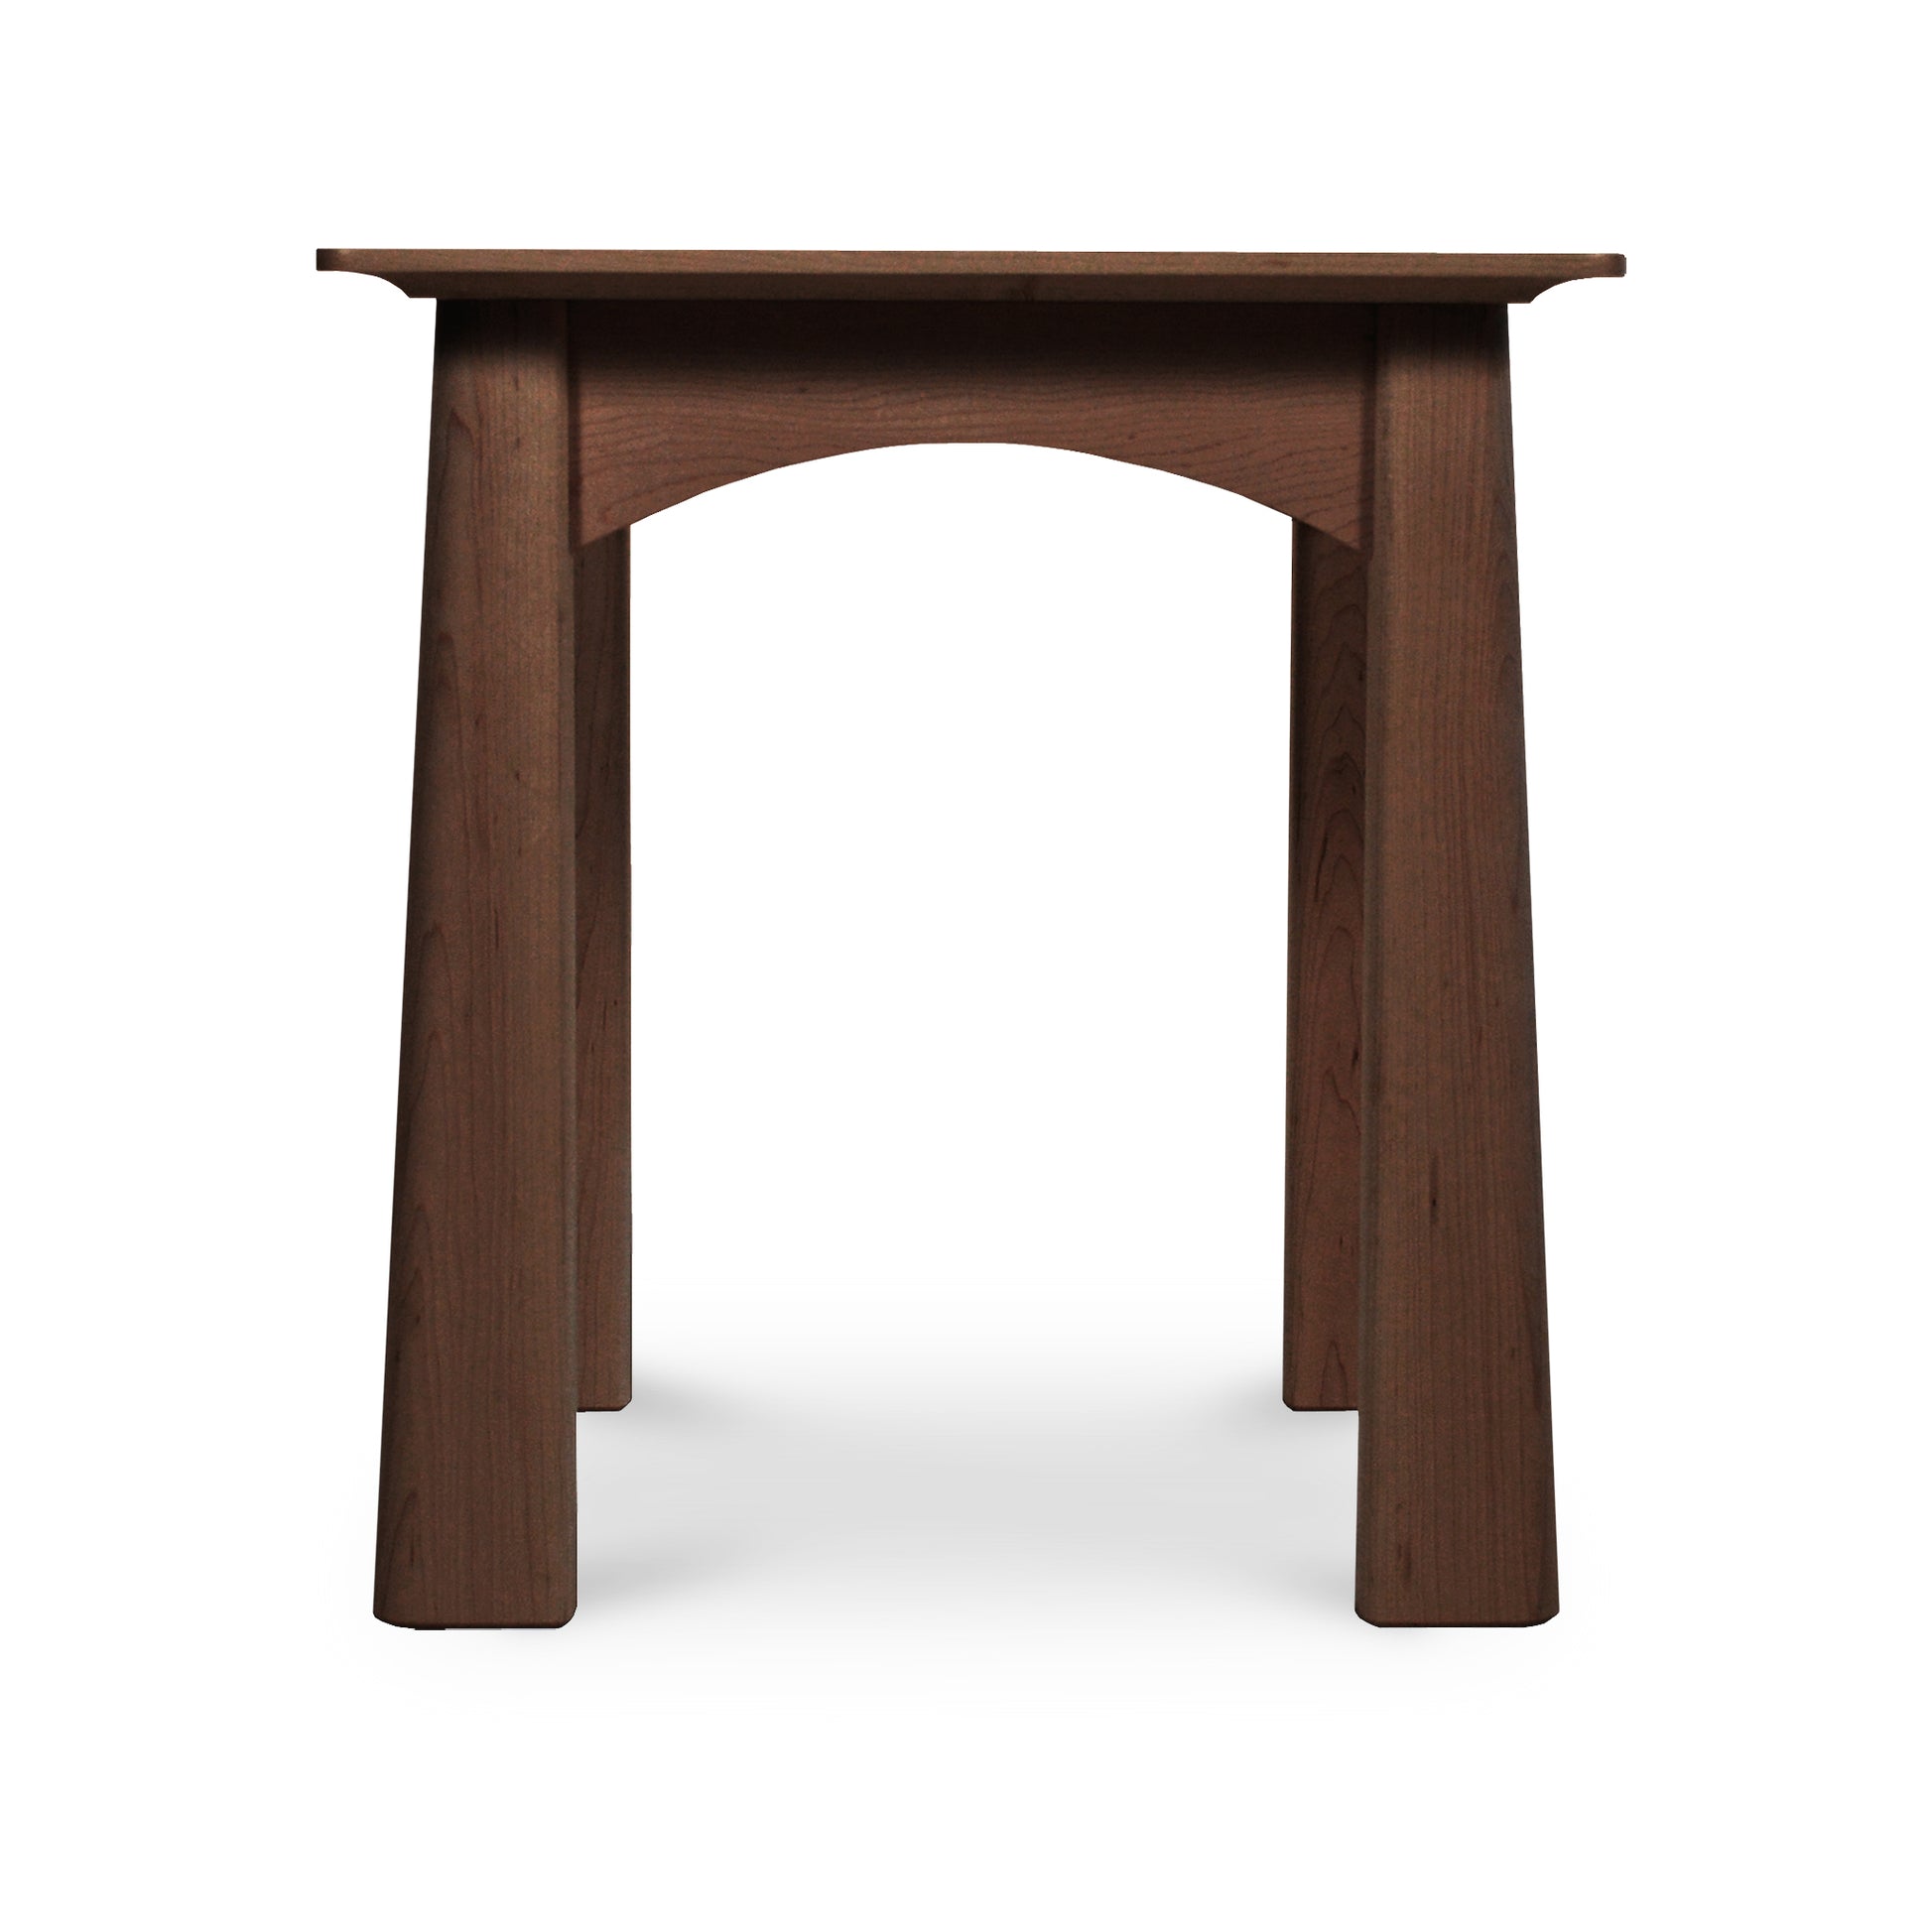 A Cherry Moon End Table crafted from solid hardwoods with a dark brown finish, featuring an arched base design and a flat rectangular top, isolated on a white background by Maple Corner Woodworks.